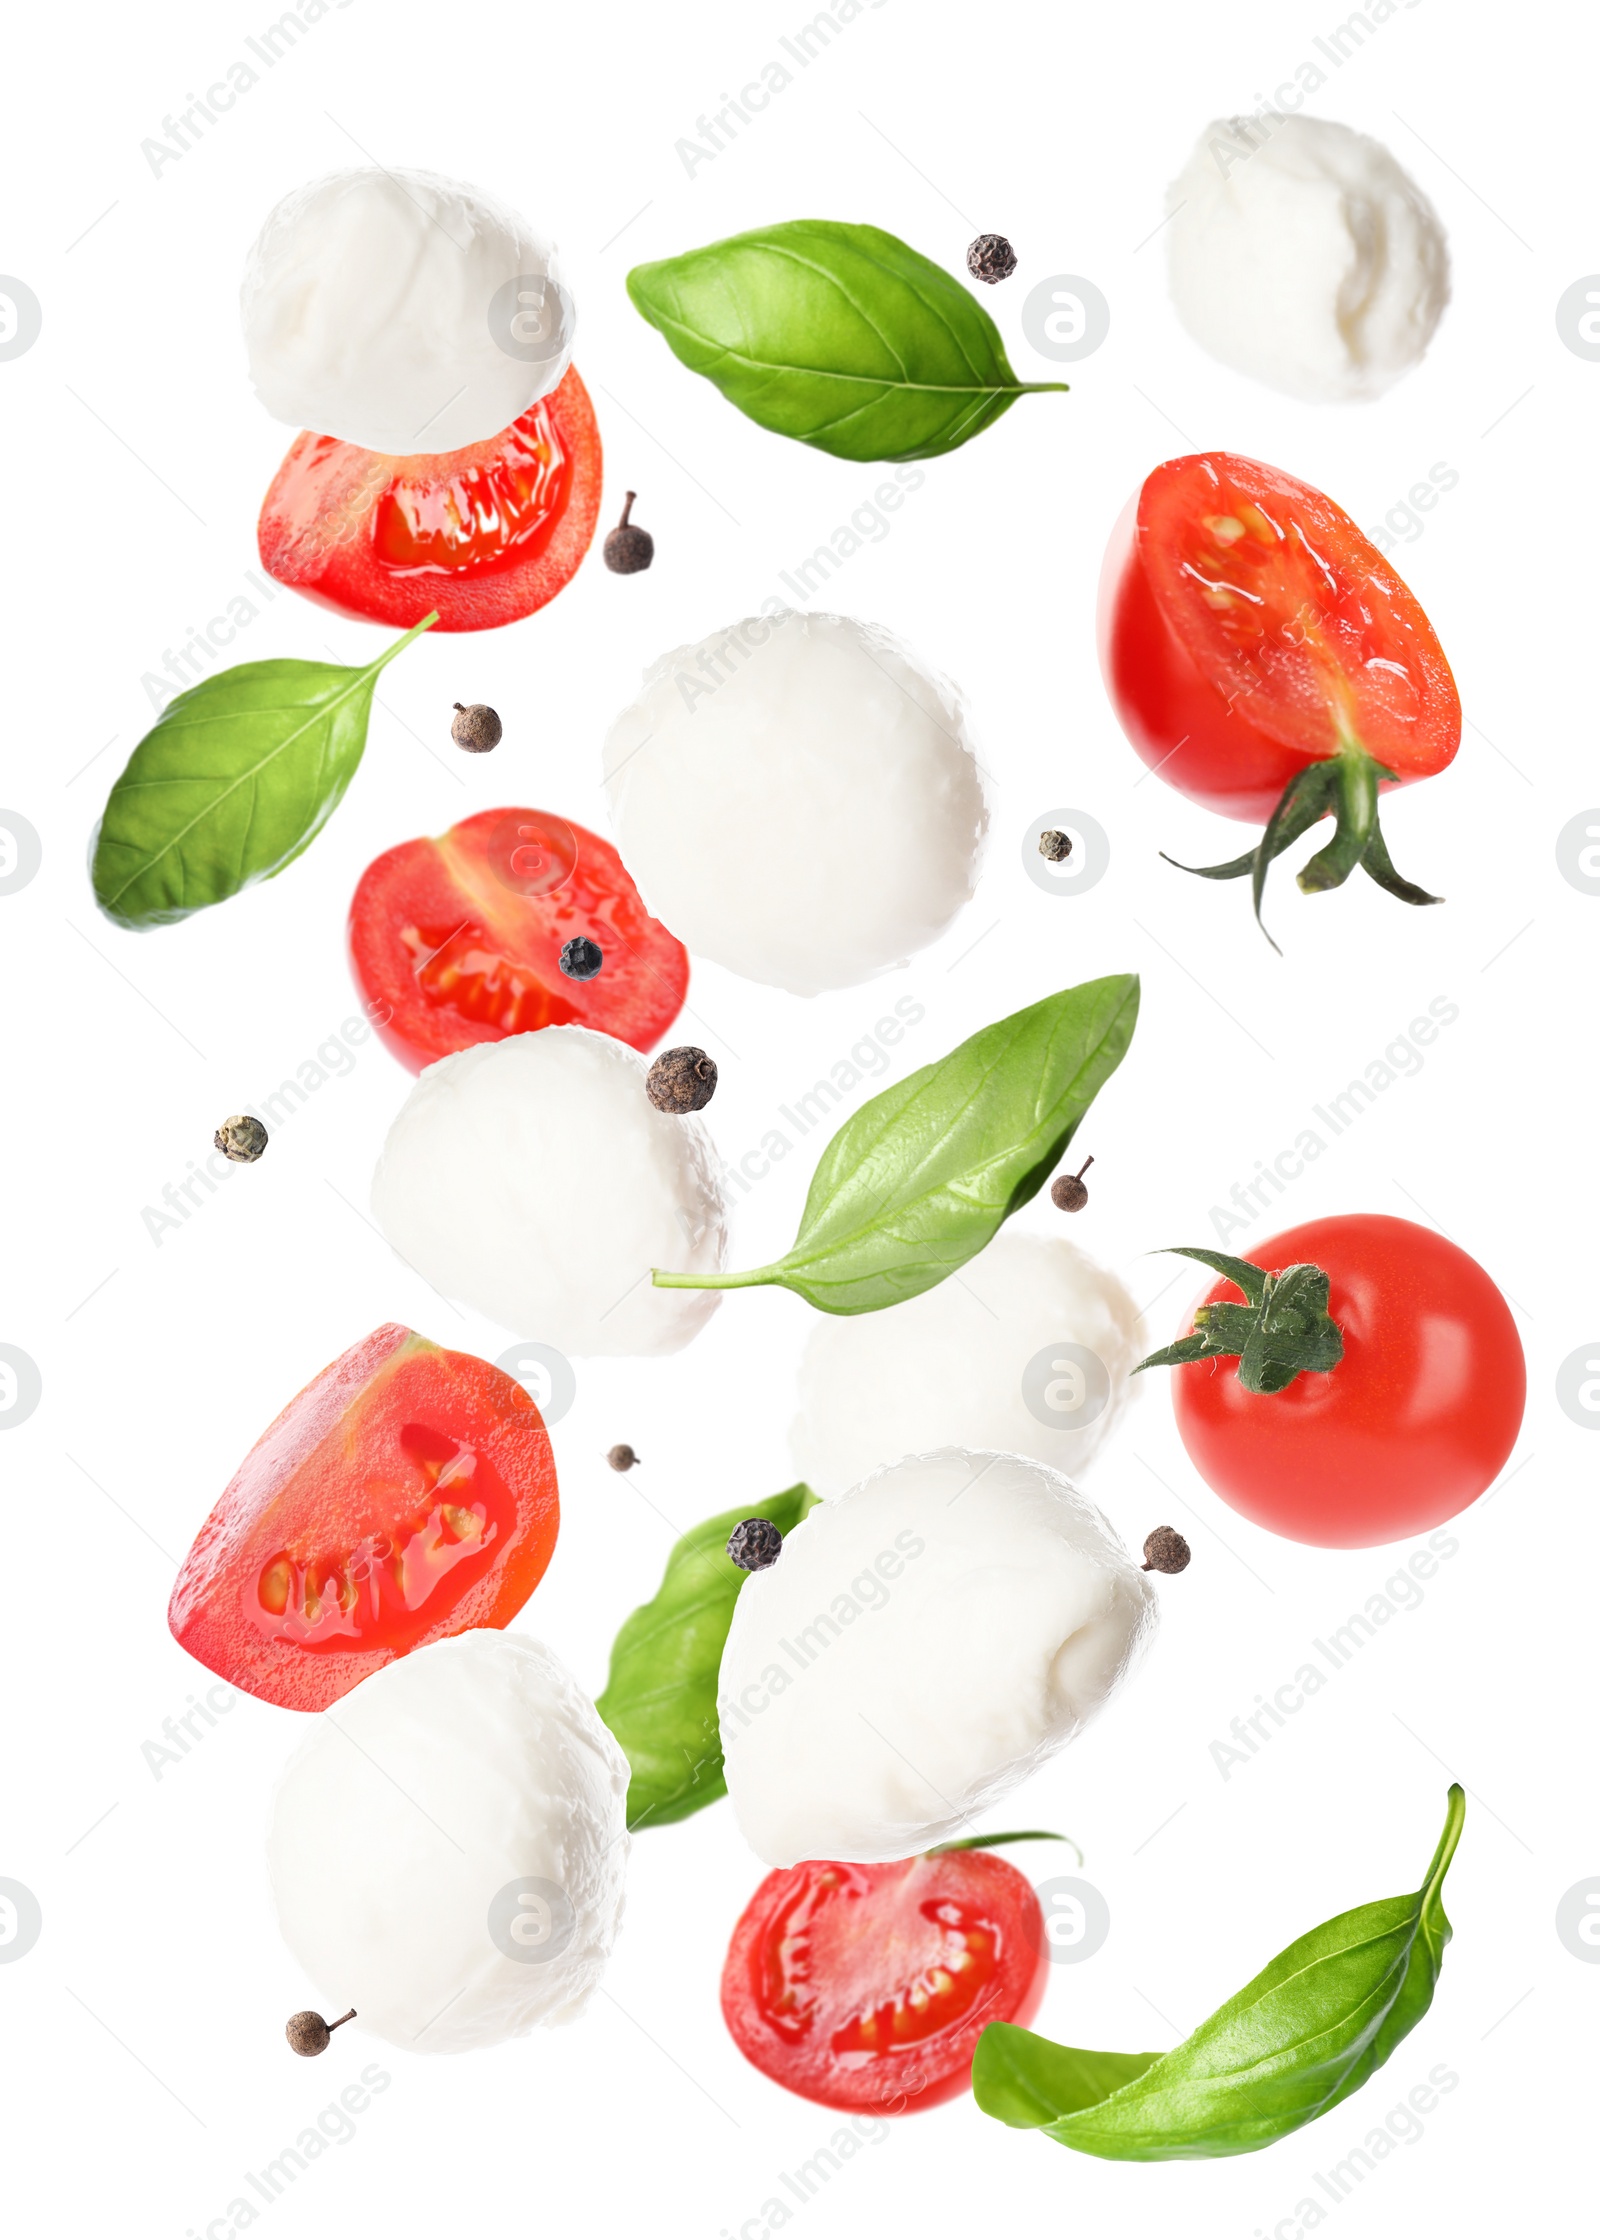 Image of Mozzarella cheese balls, tomatoes, basil leaves and peppercorns for caprese salad flying on white background